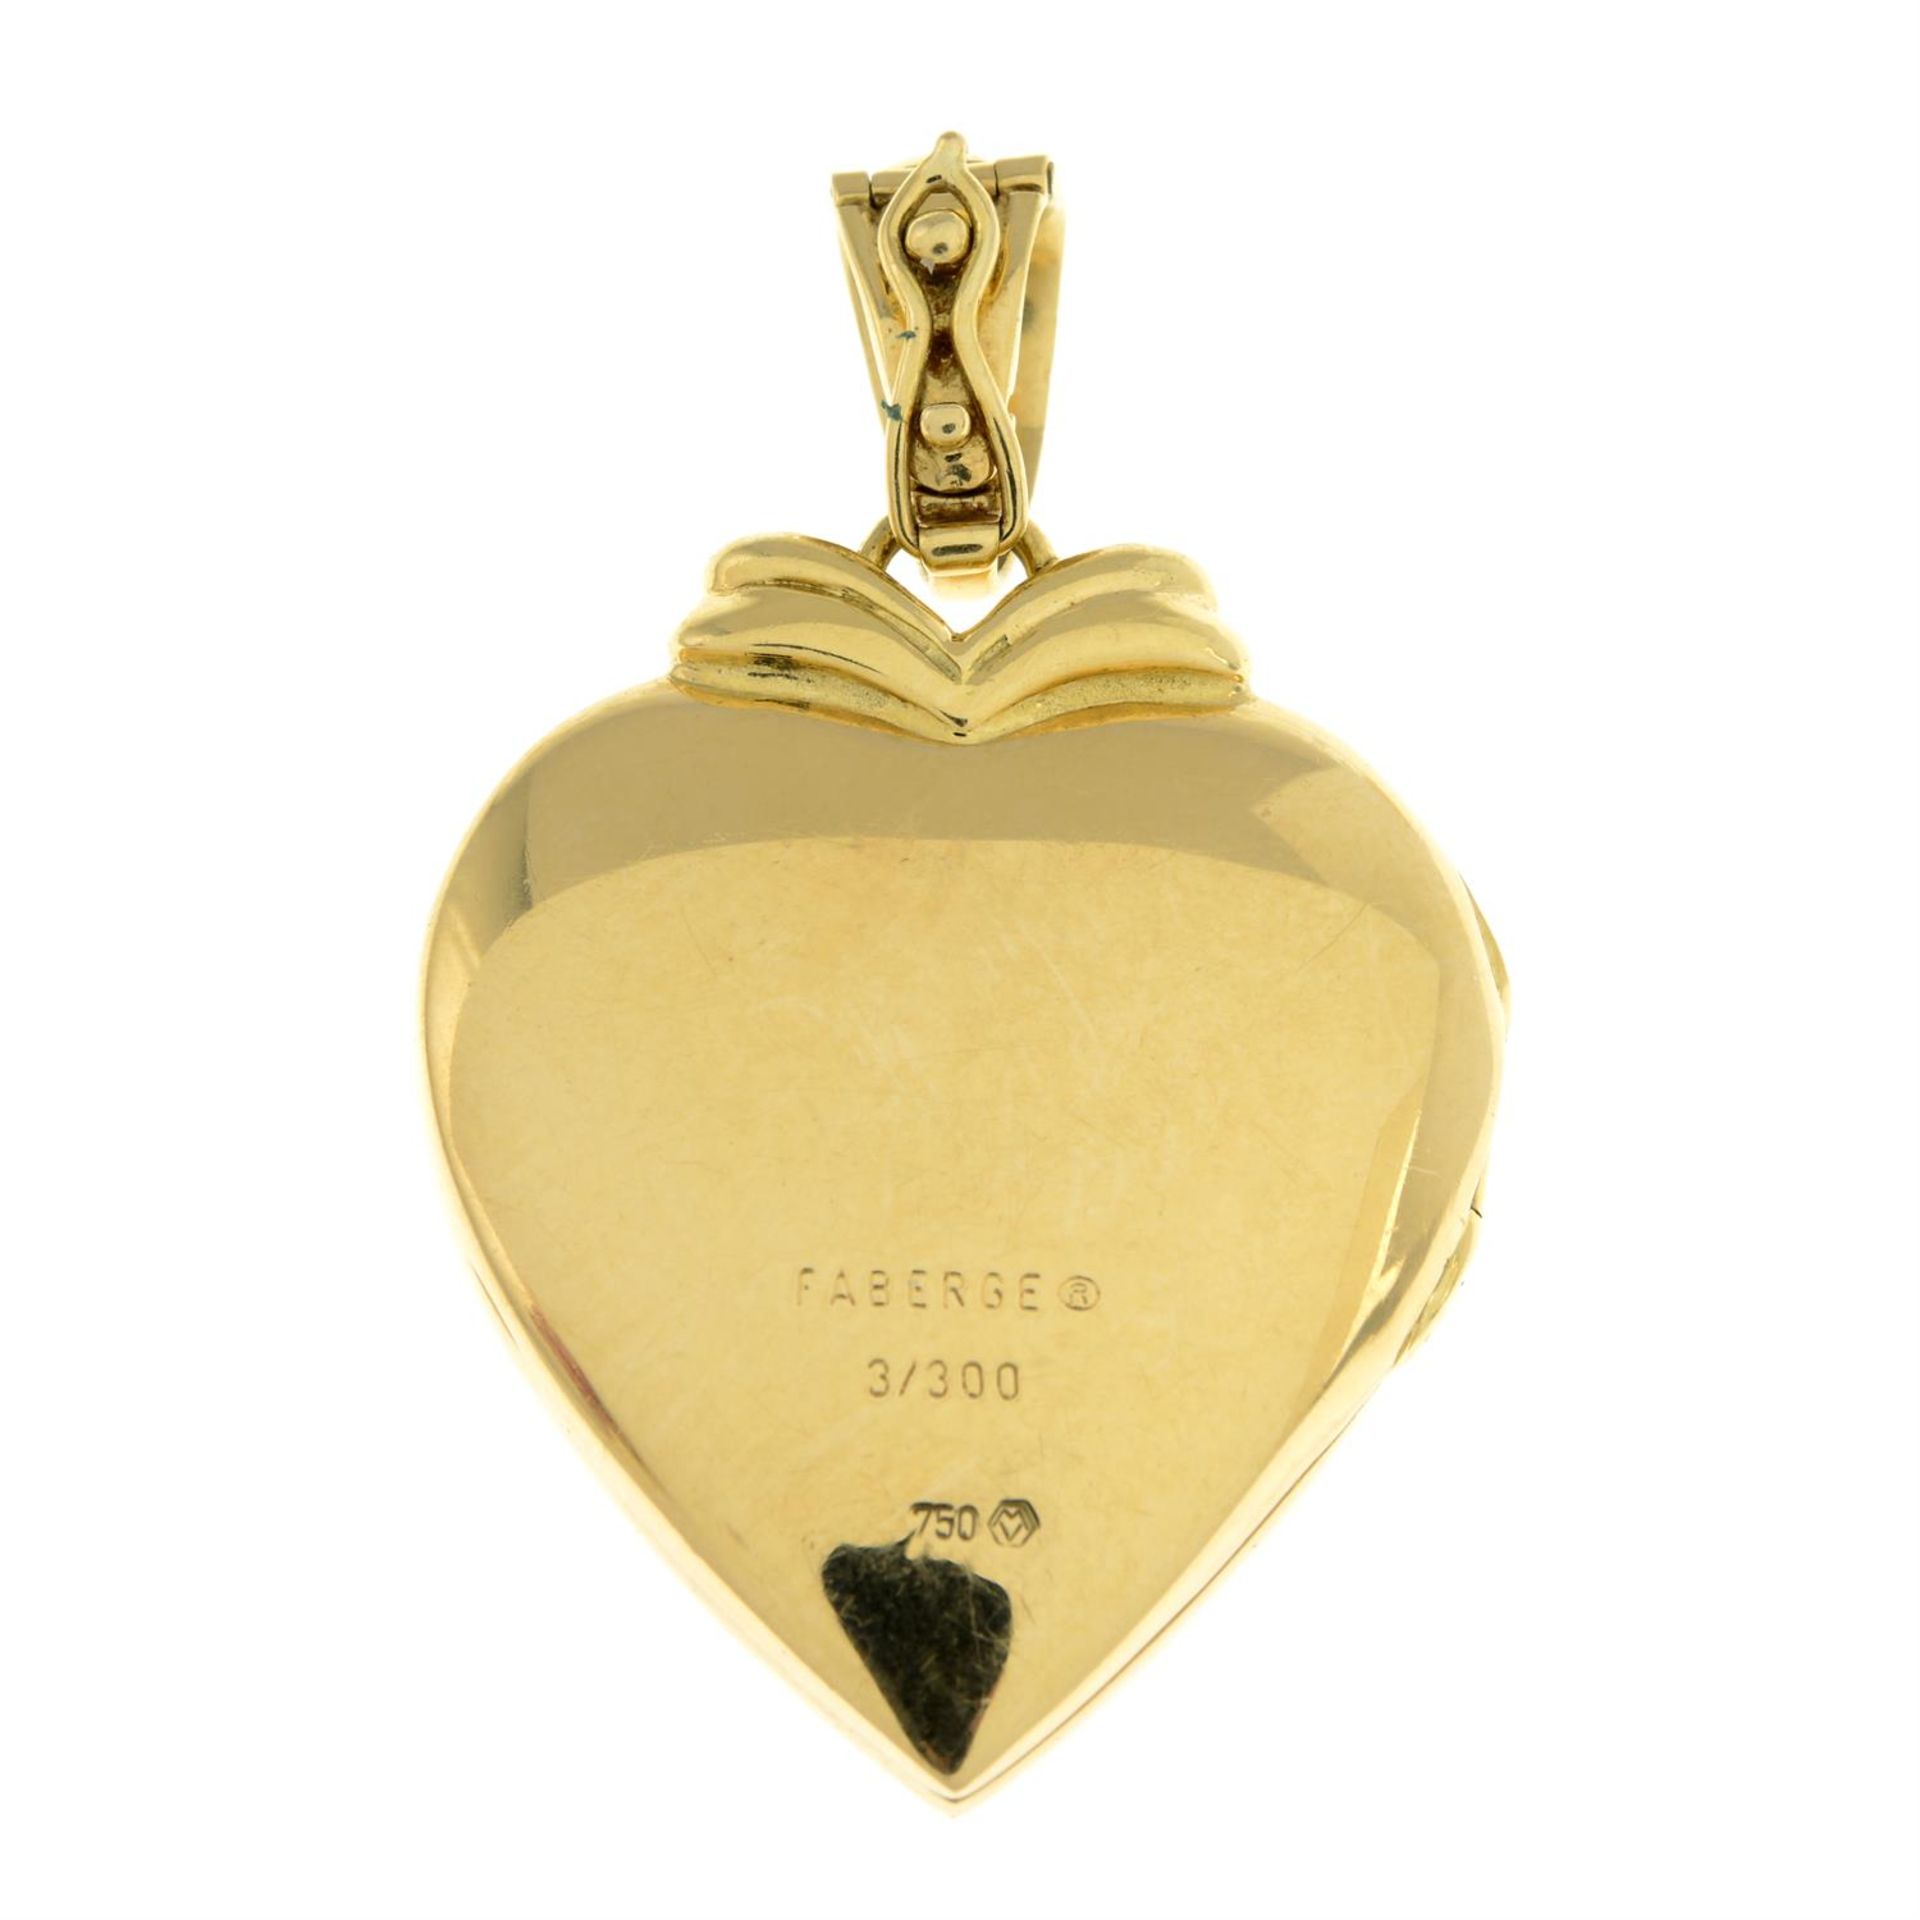 Diamond and enamel heart locket, by Fabergé - Image 3 of 6